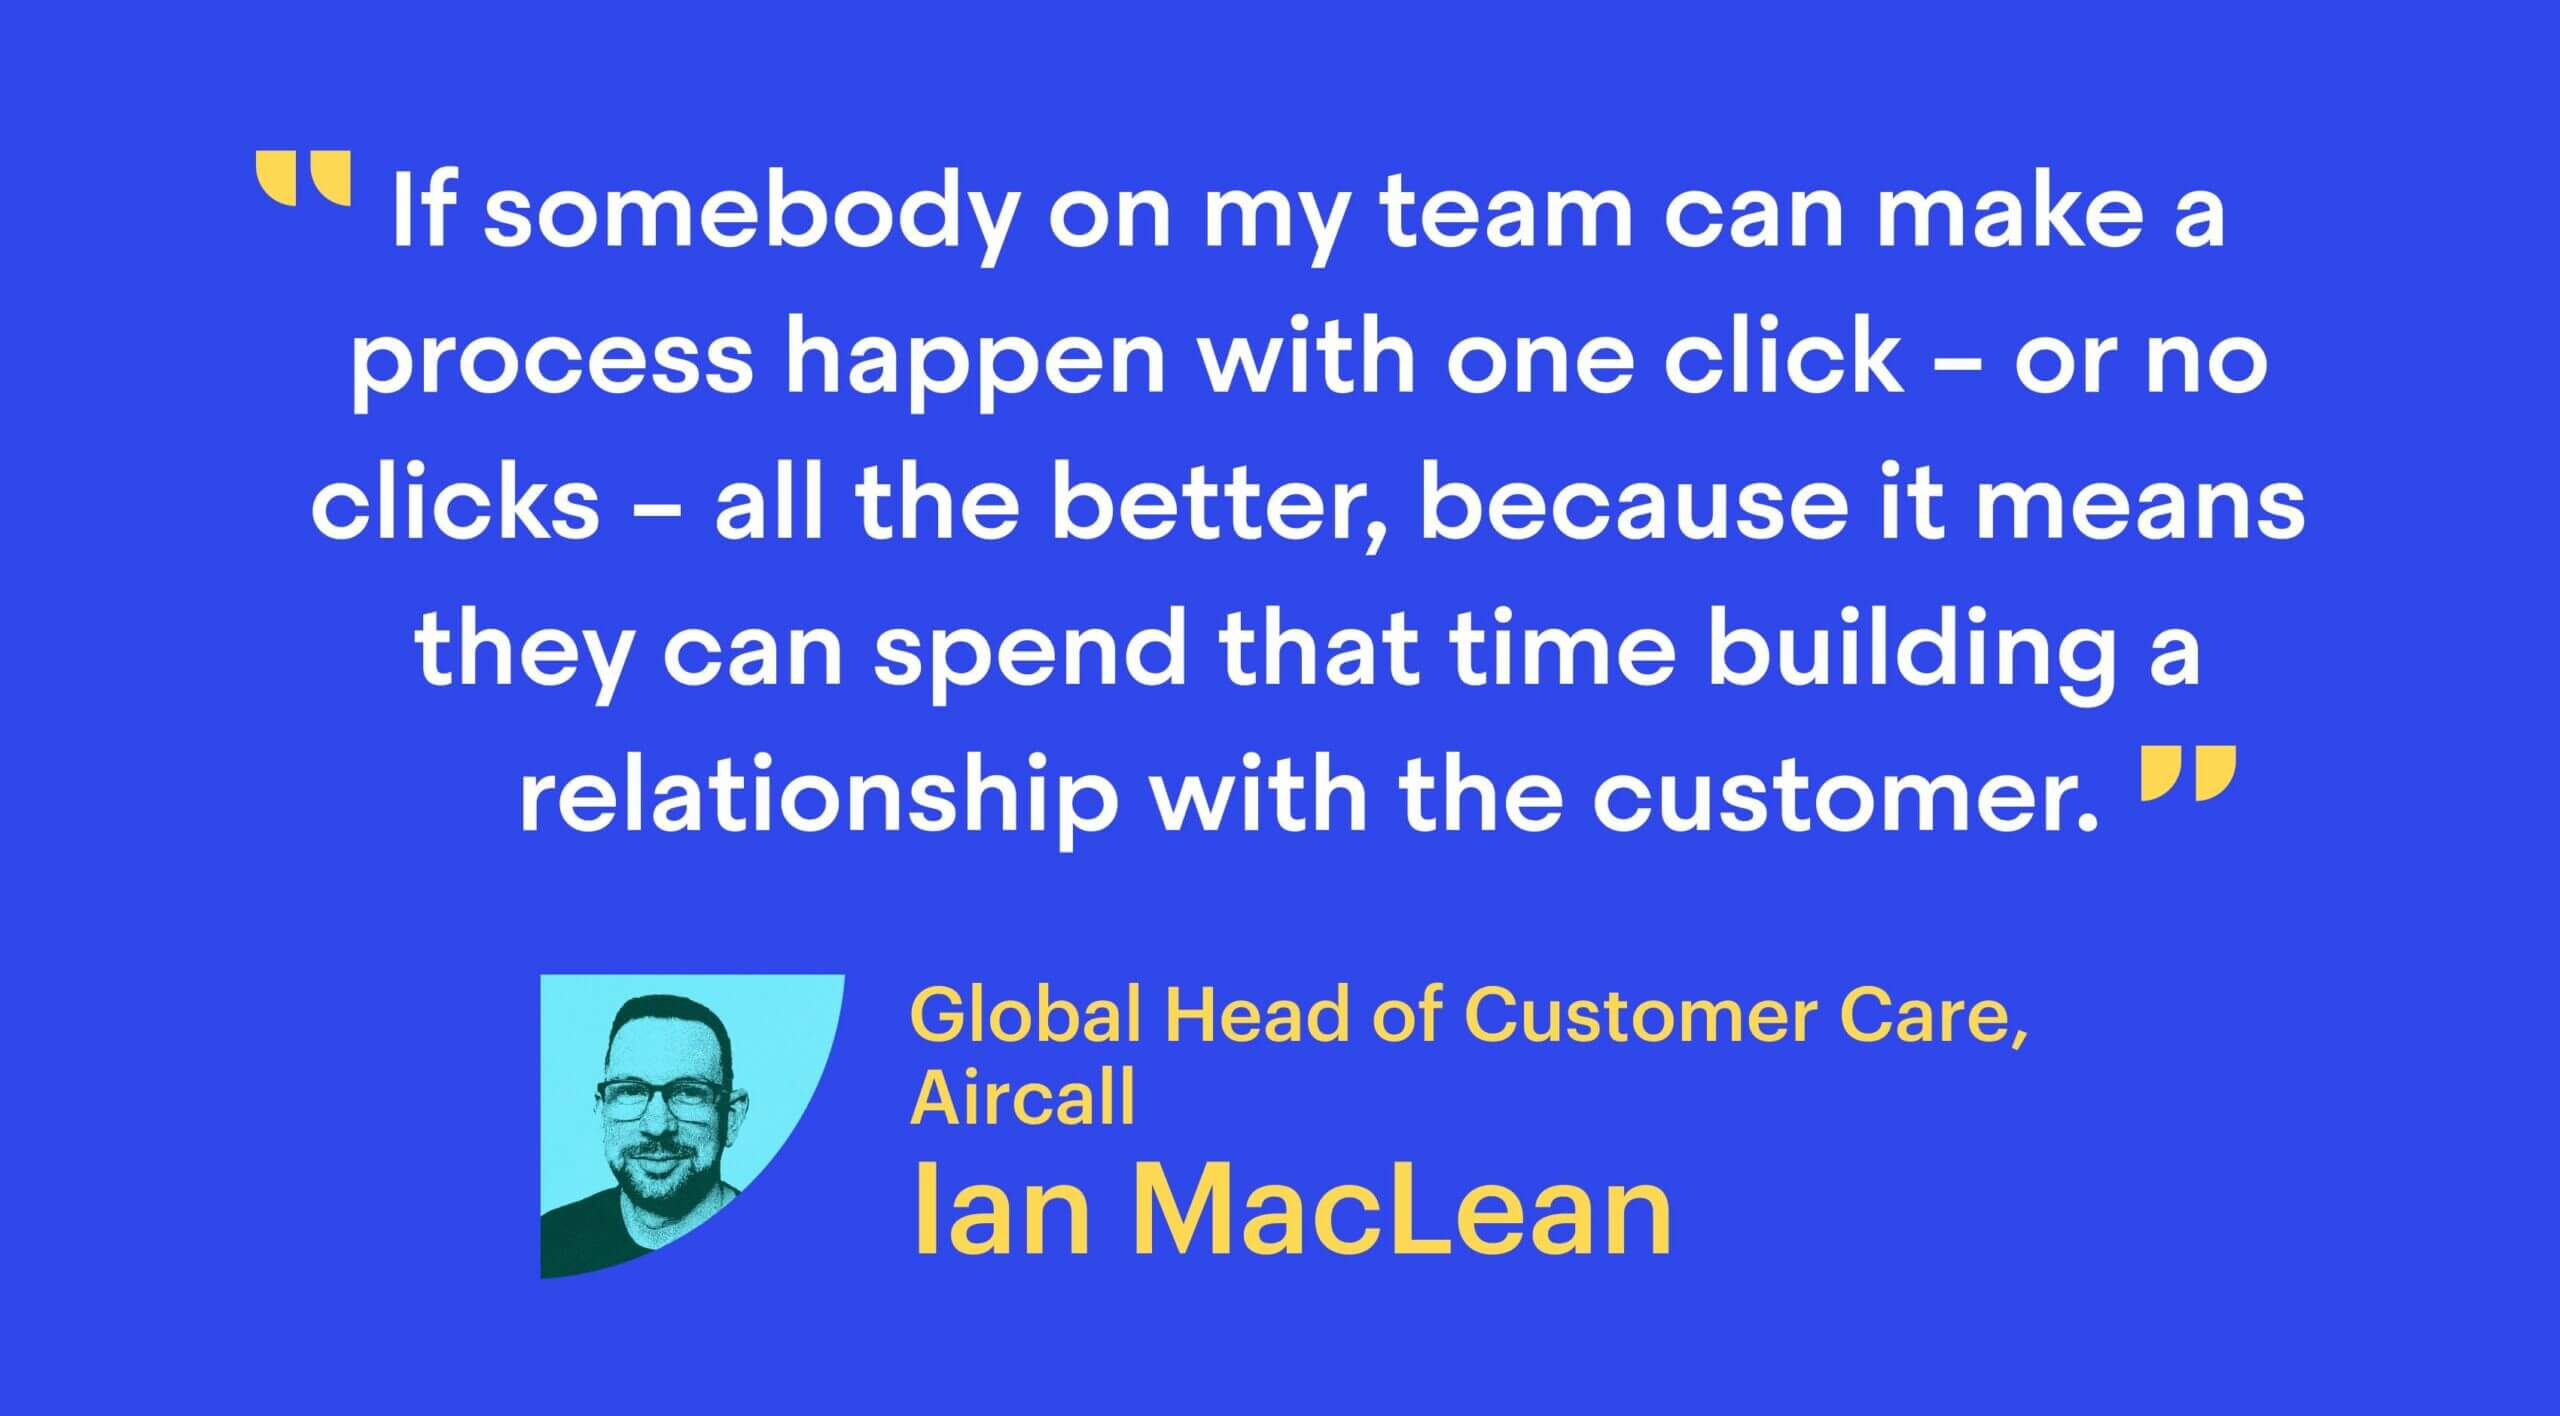 “If somebody on my team can make a process happen with one click – or no clicks – all the better, because it means they can spend that time building a relationship with the customer.”